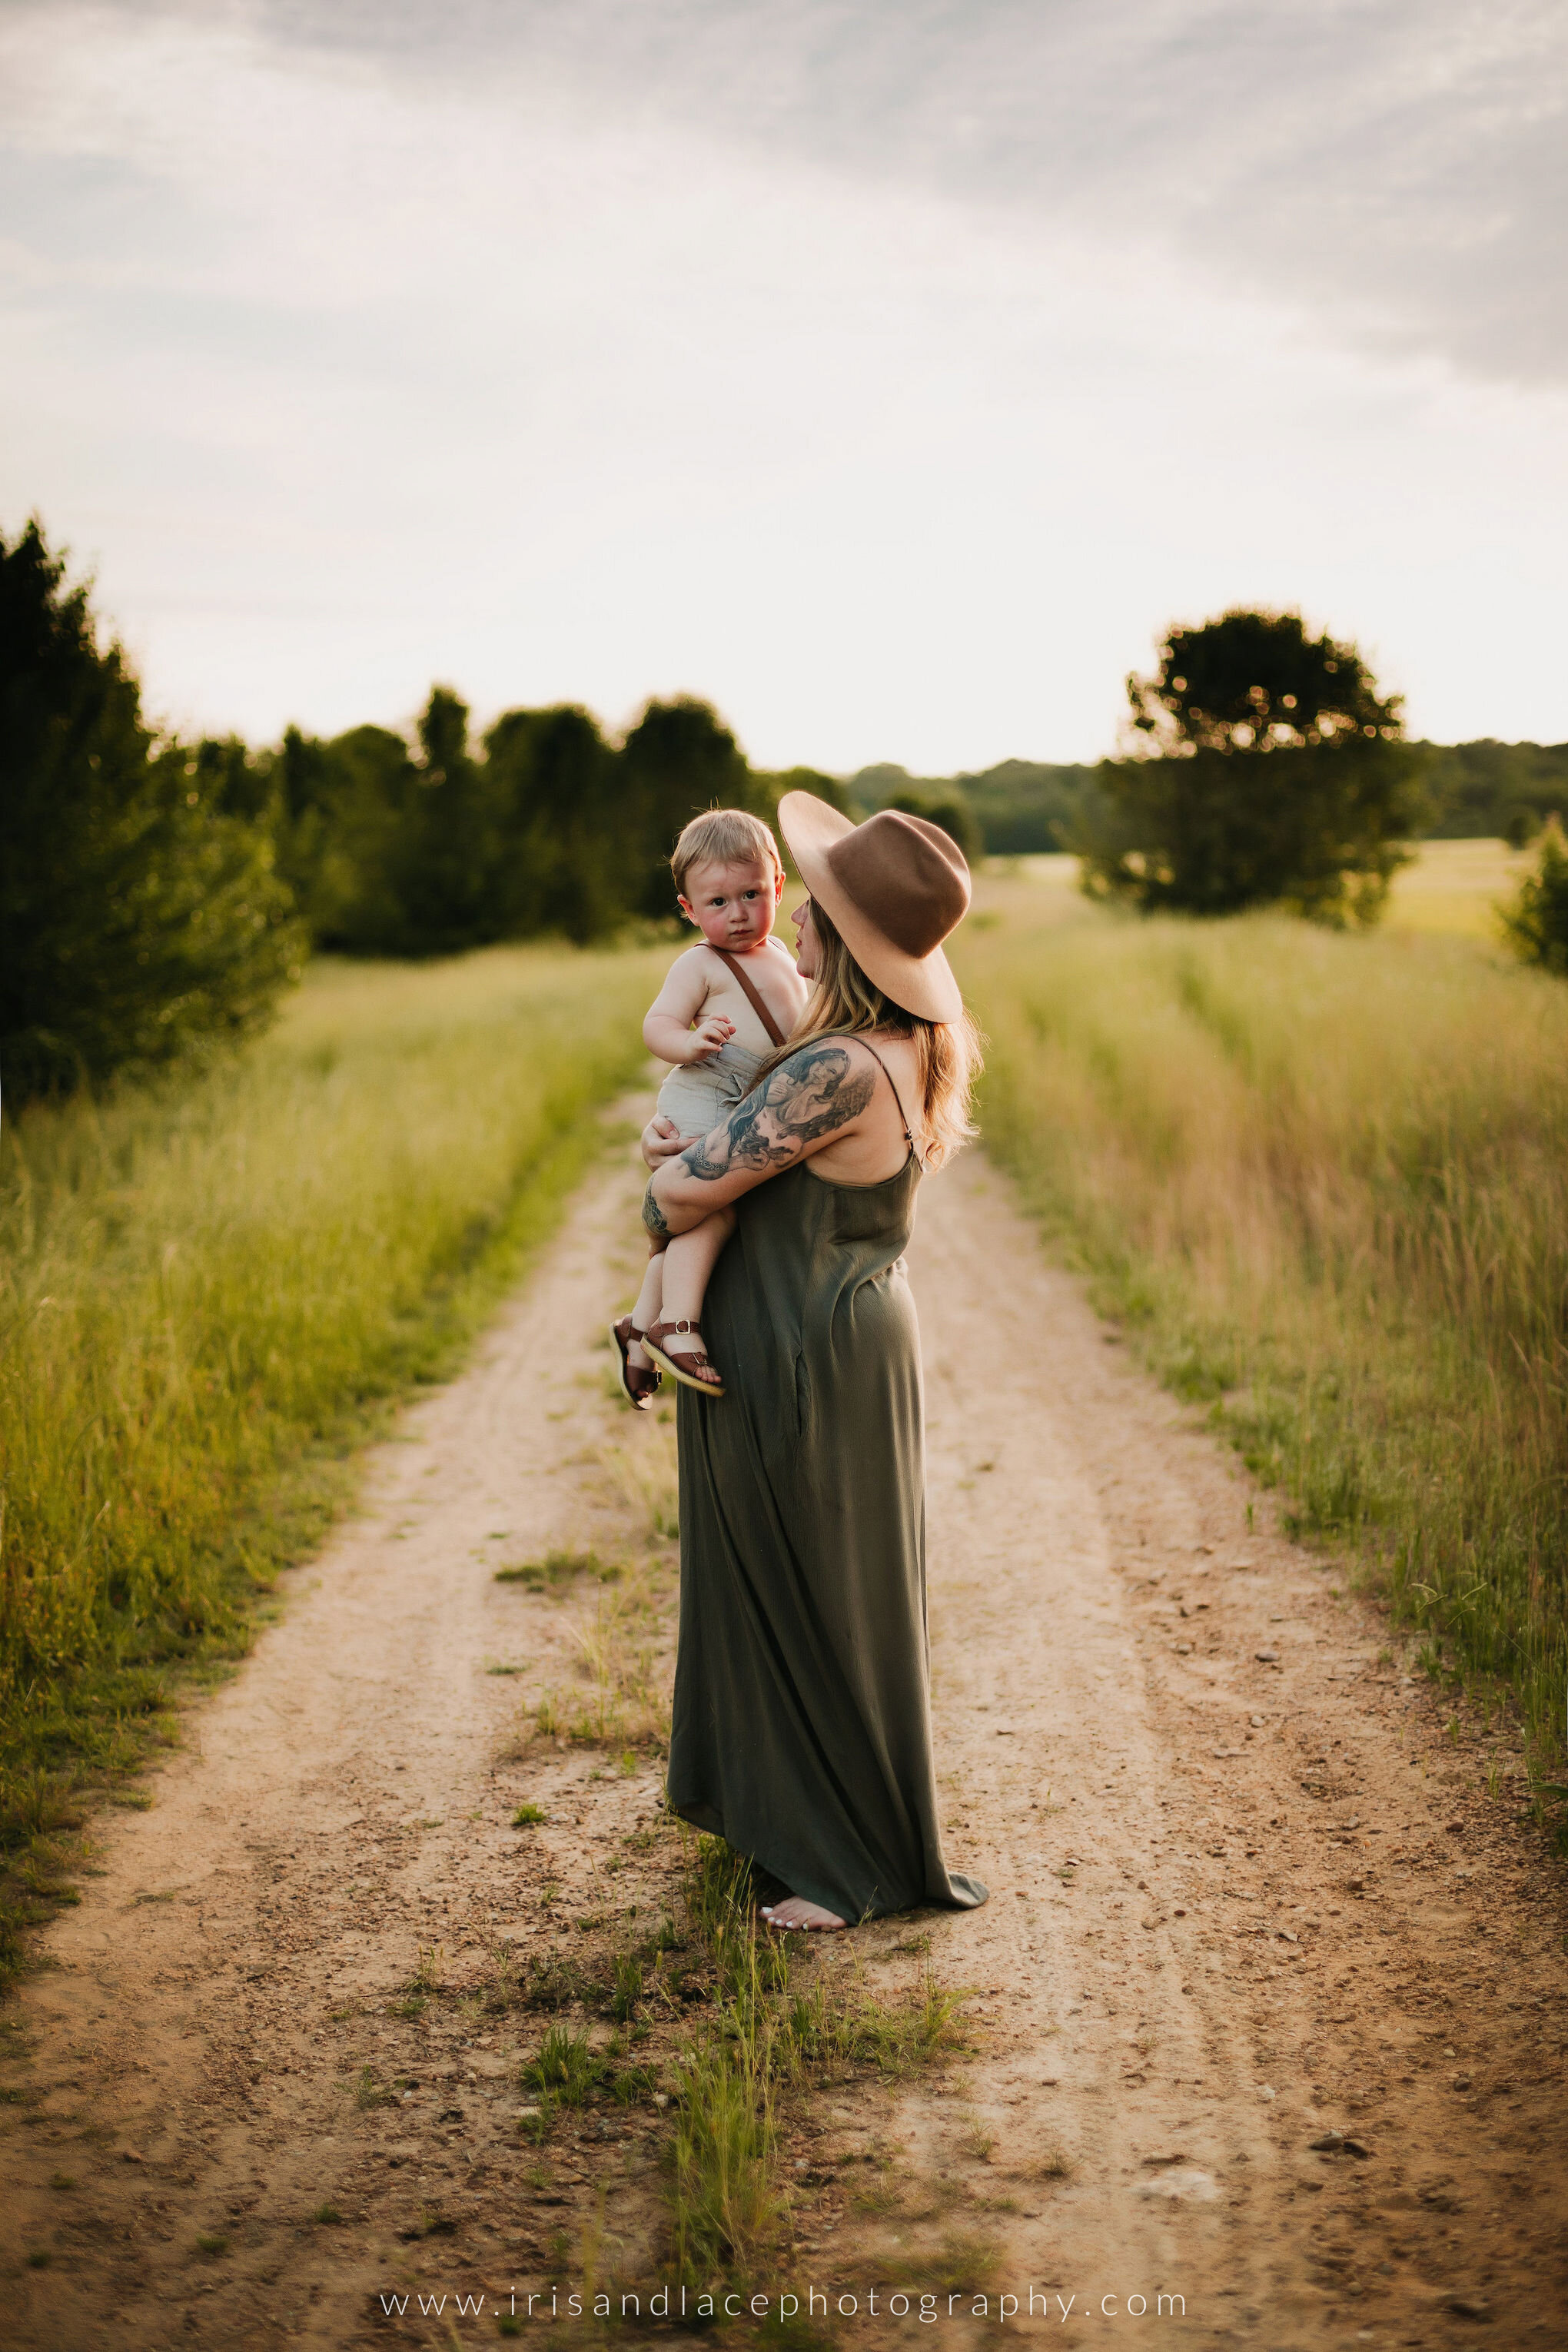 Mountain View, CA Family Photographer | Iris and Lace Photography